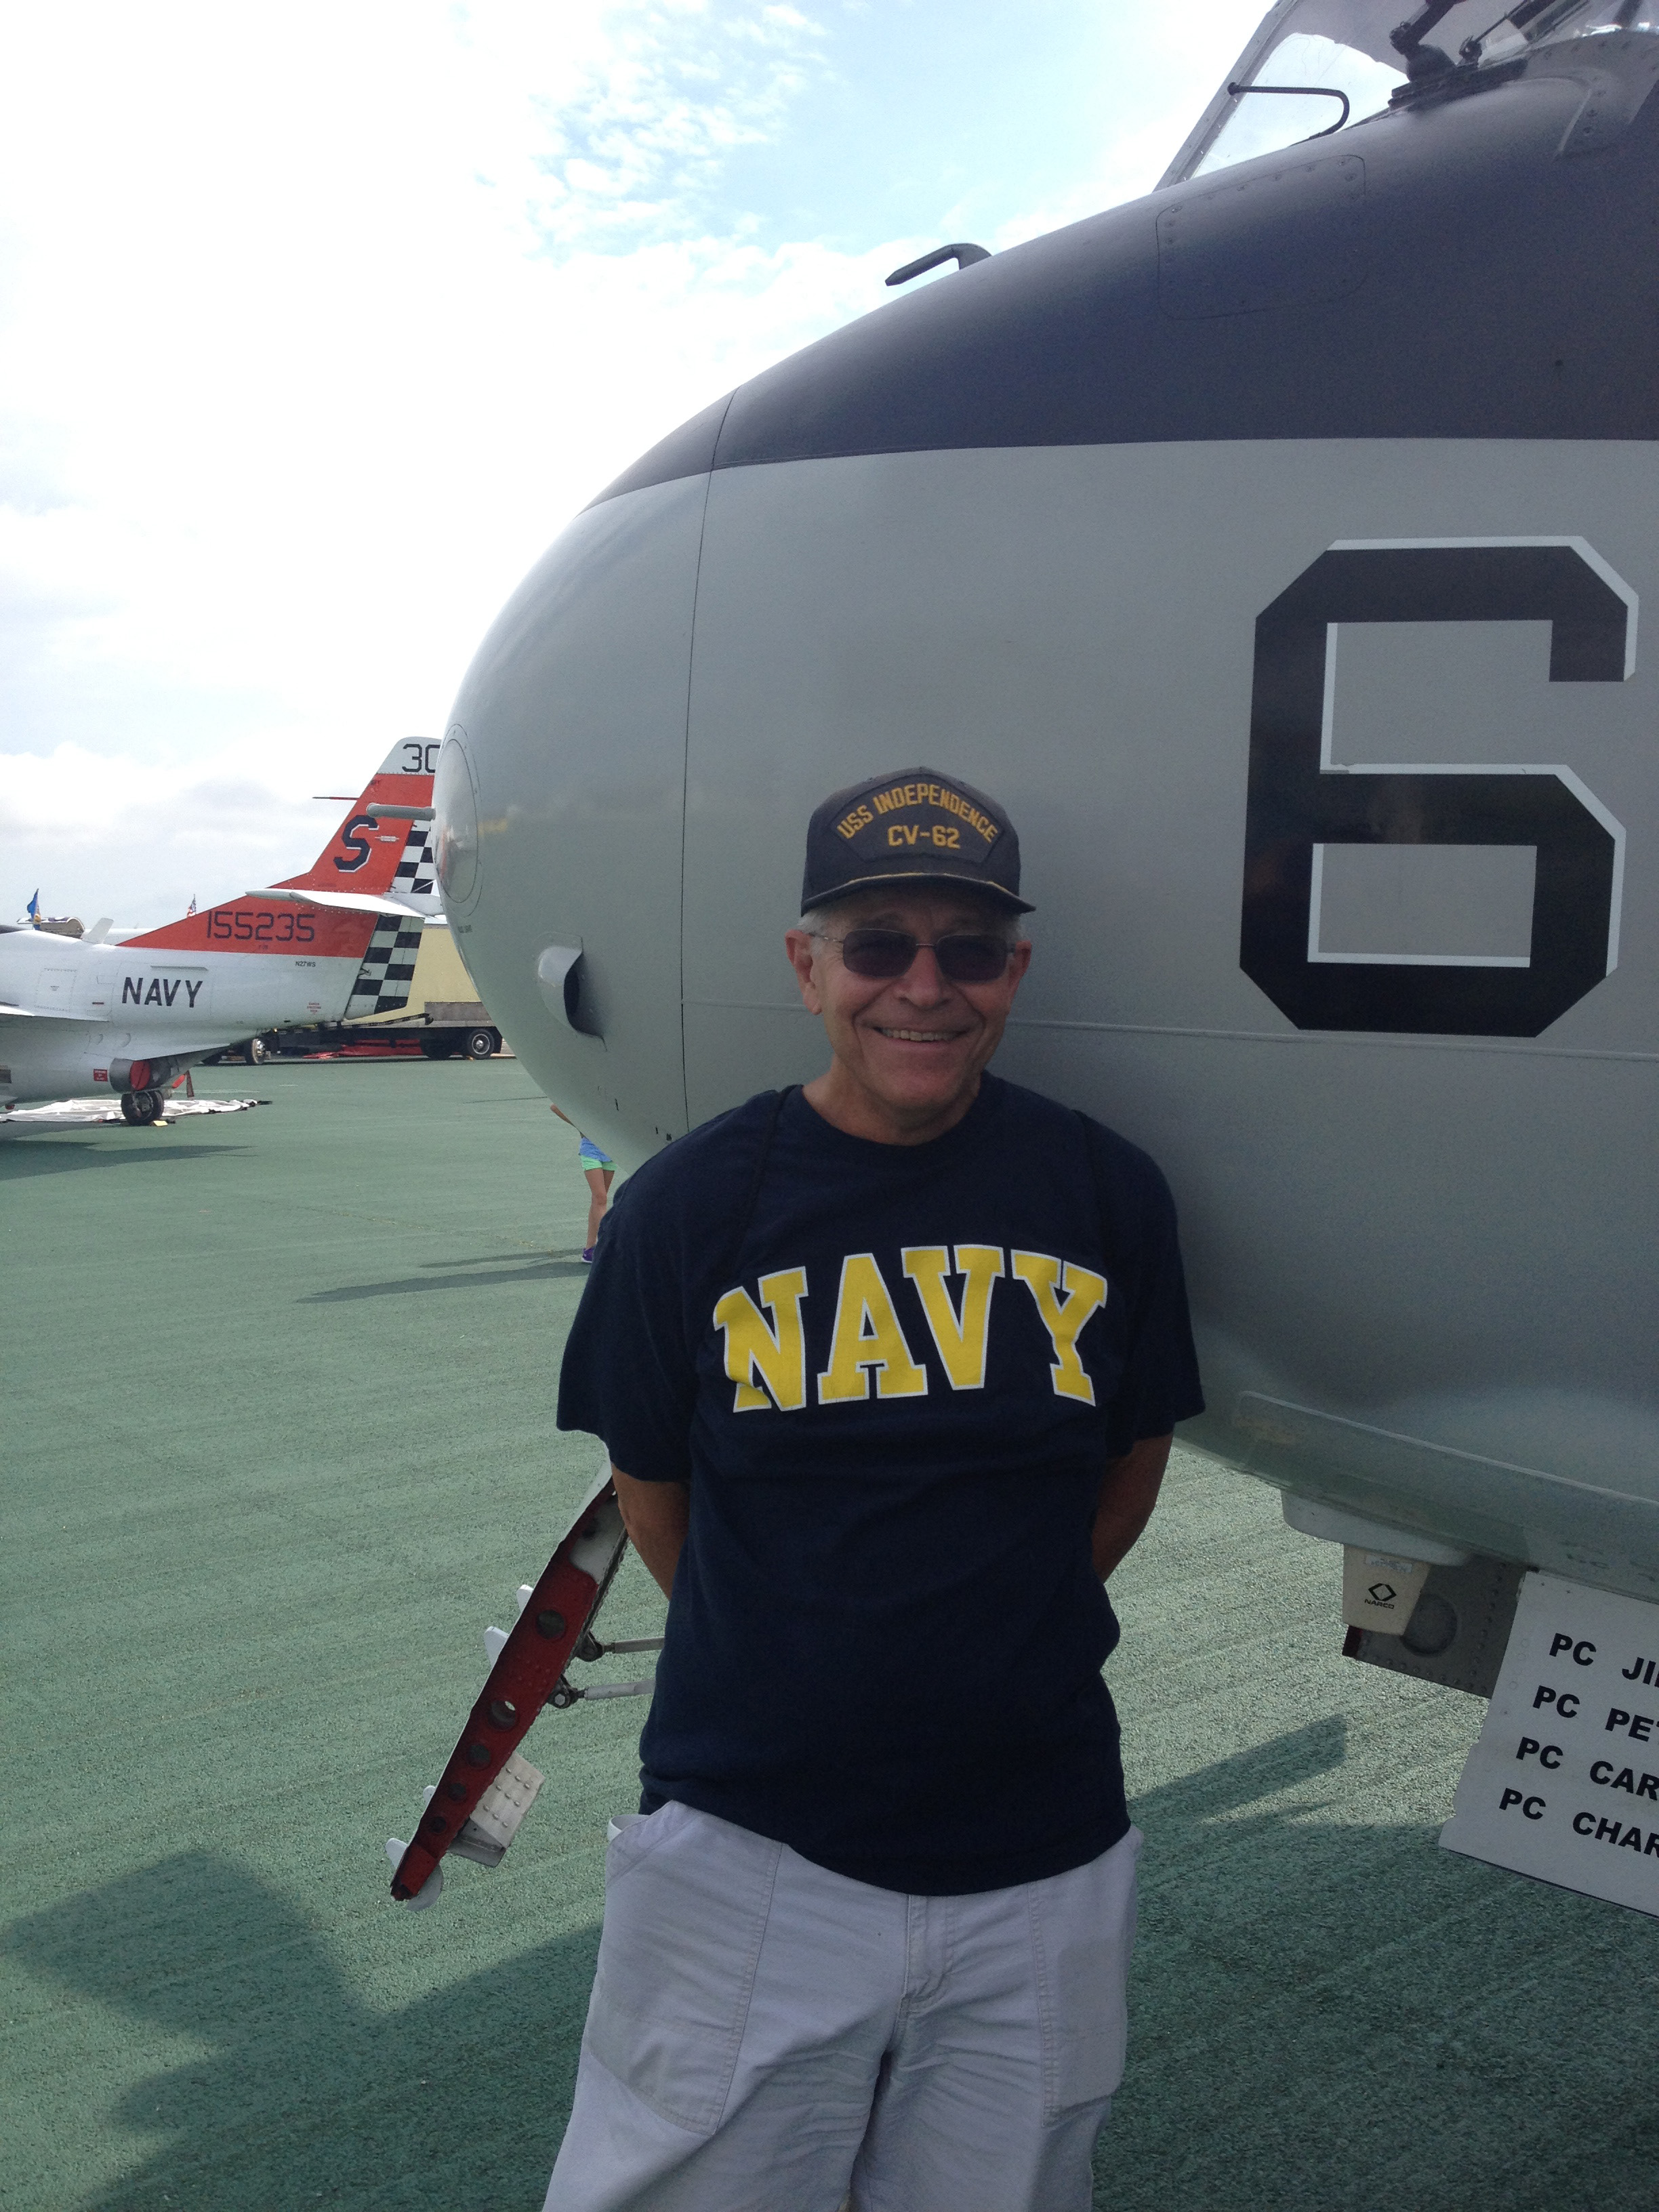 One  of the many former navy crewmen who did time in or on "Miss Belle" during her service life met up with the aircraft during a 2014 show, a regular occurrence for Doug Goss. (photo via Doug Goss)